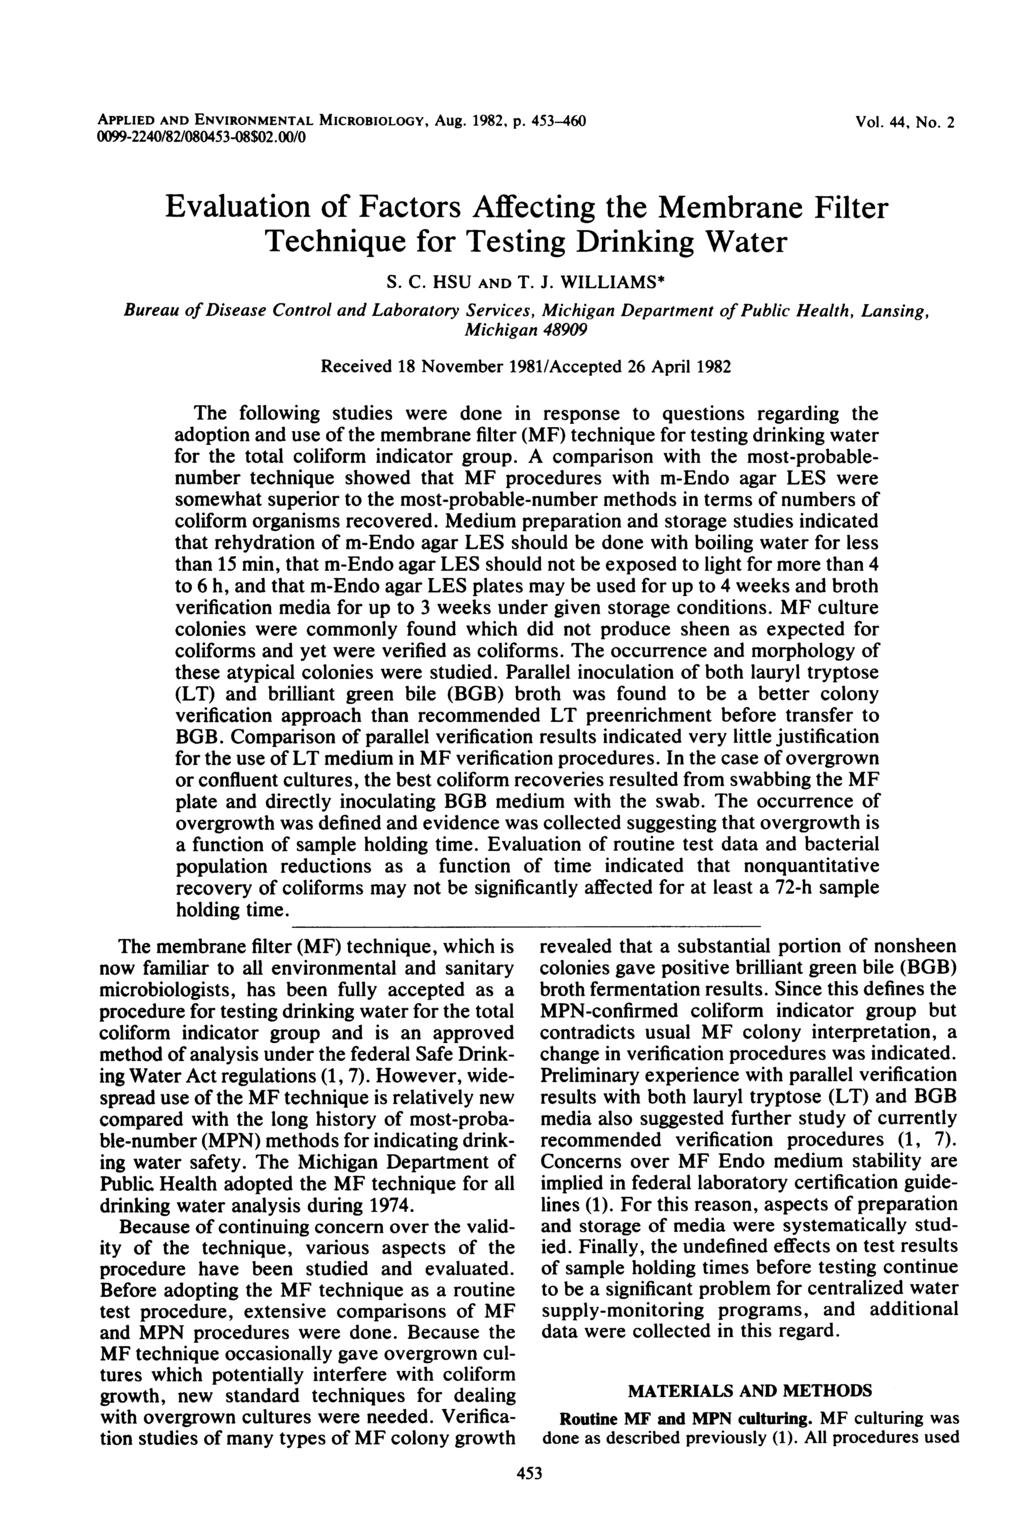 APPLIED AND ENVIRONMENTAL MICROBIOLOGY, Aug. 1982, p. 453-460 0099-2240/82/080453-08$02.00/0 Vol. 44, No. 2 Evaluation of Factors Affecting the Membrane Filter Technique for Testing Drinking Water S.